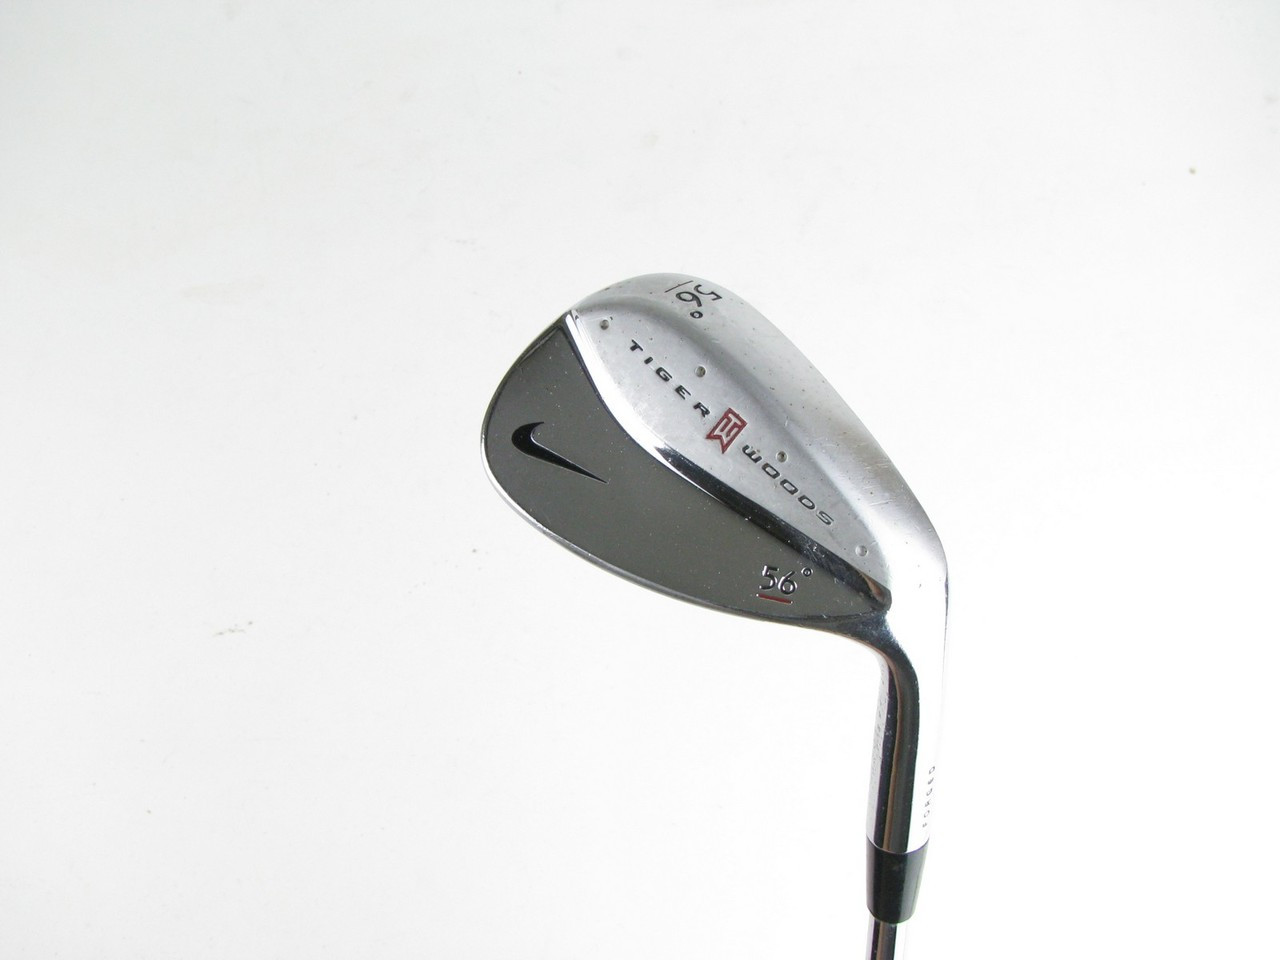 Nike Tiger Woods Forged Sand Wedge 56 degree w/ Steel (Out Stock) - Clubs n Golf